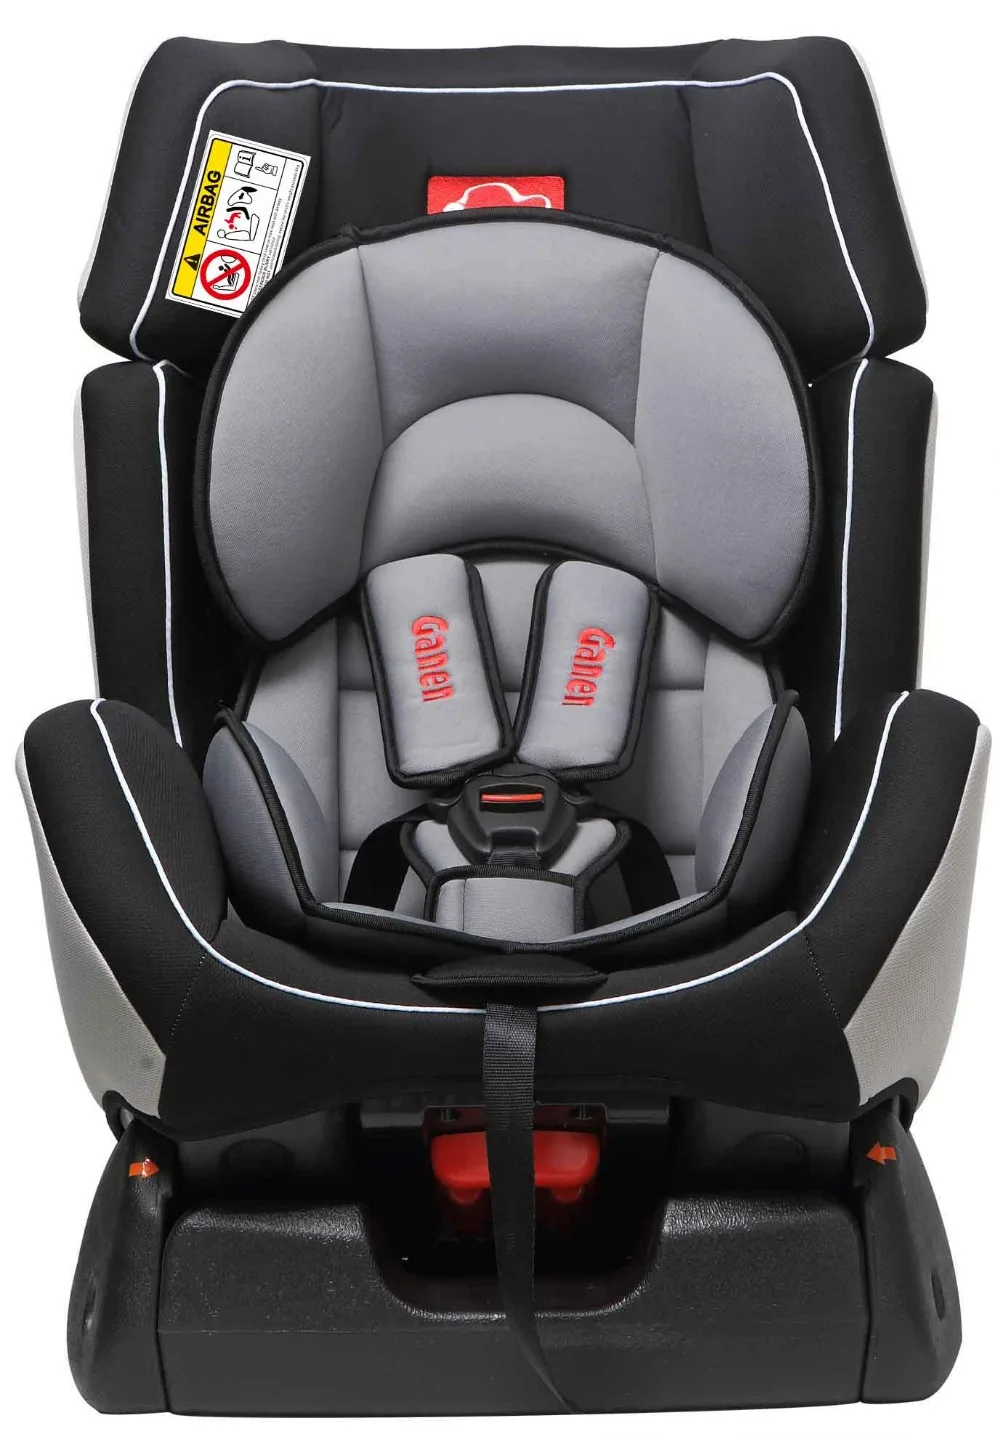 Hot Sale Child Car Seat,Baby Car Seat With Ece R44/04 Certification